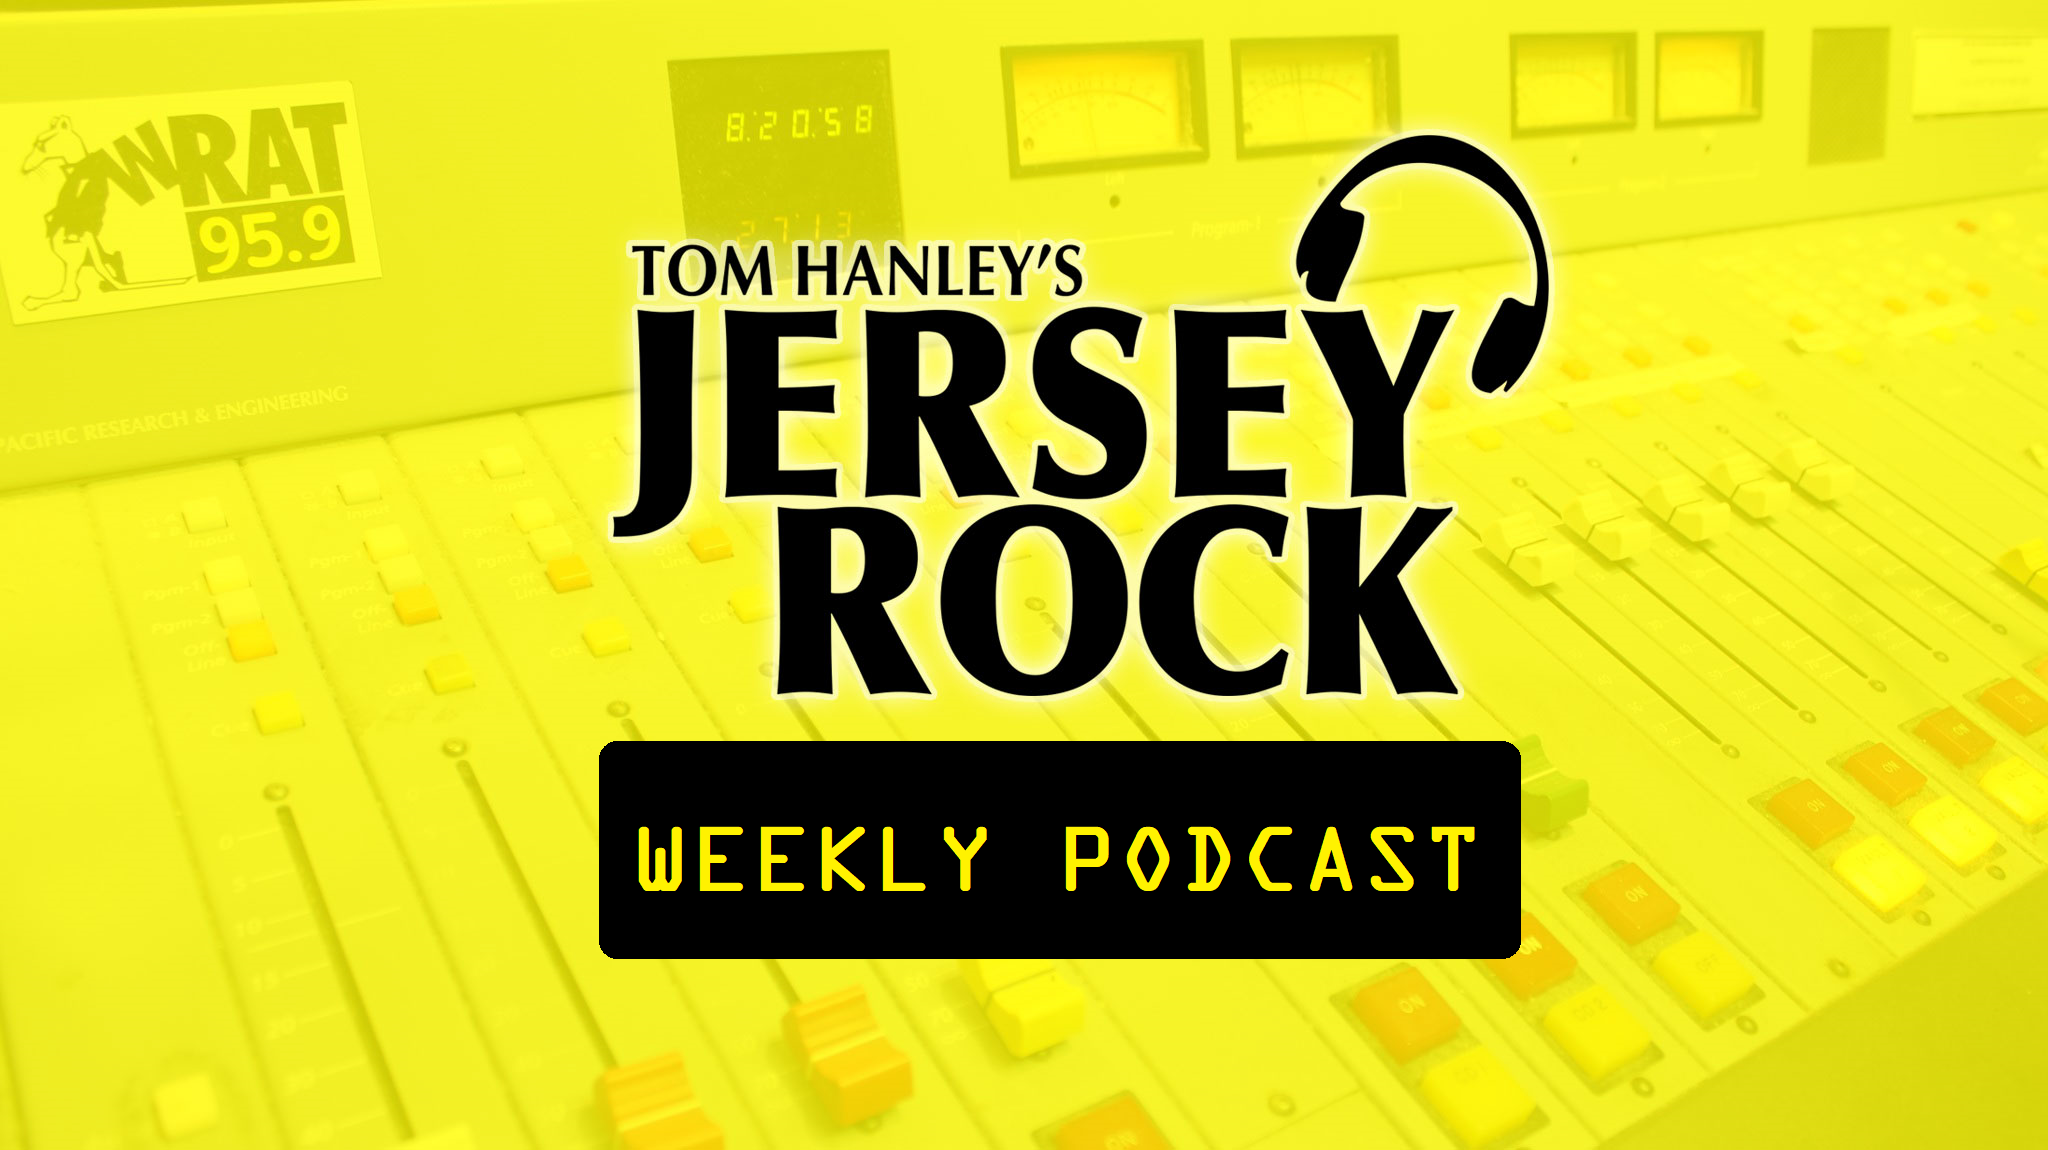 Jersey Rock Weekly Podcast Episode 295